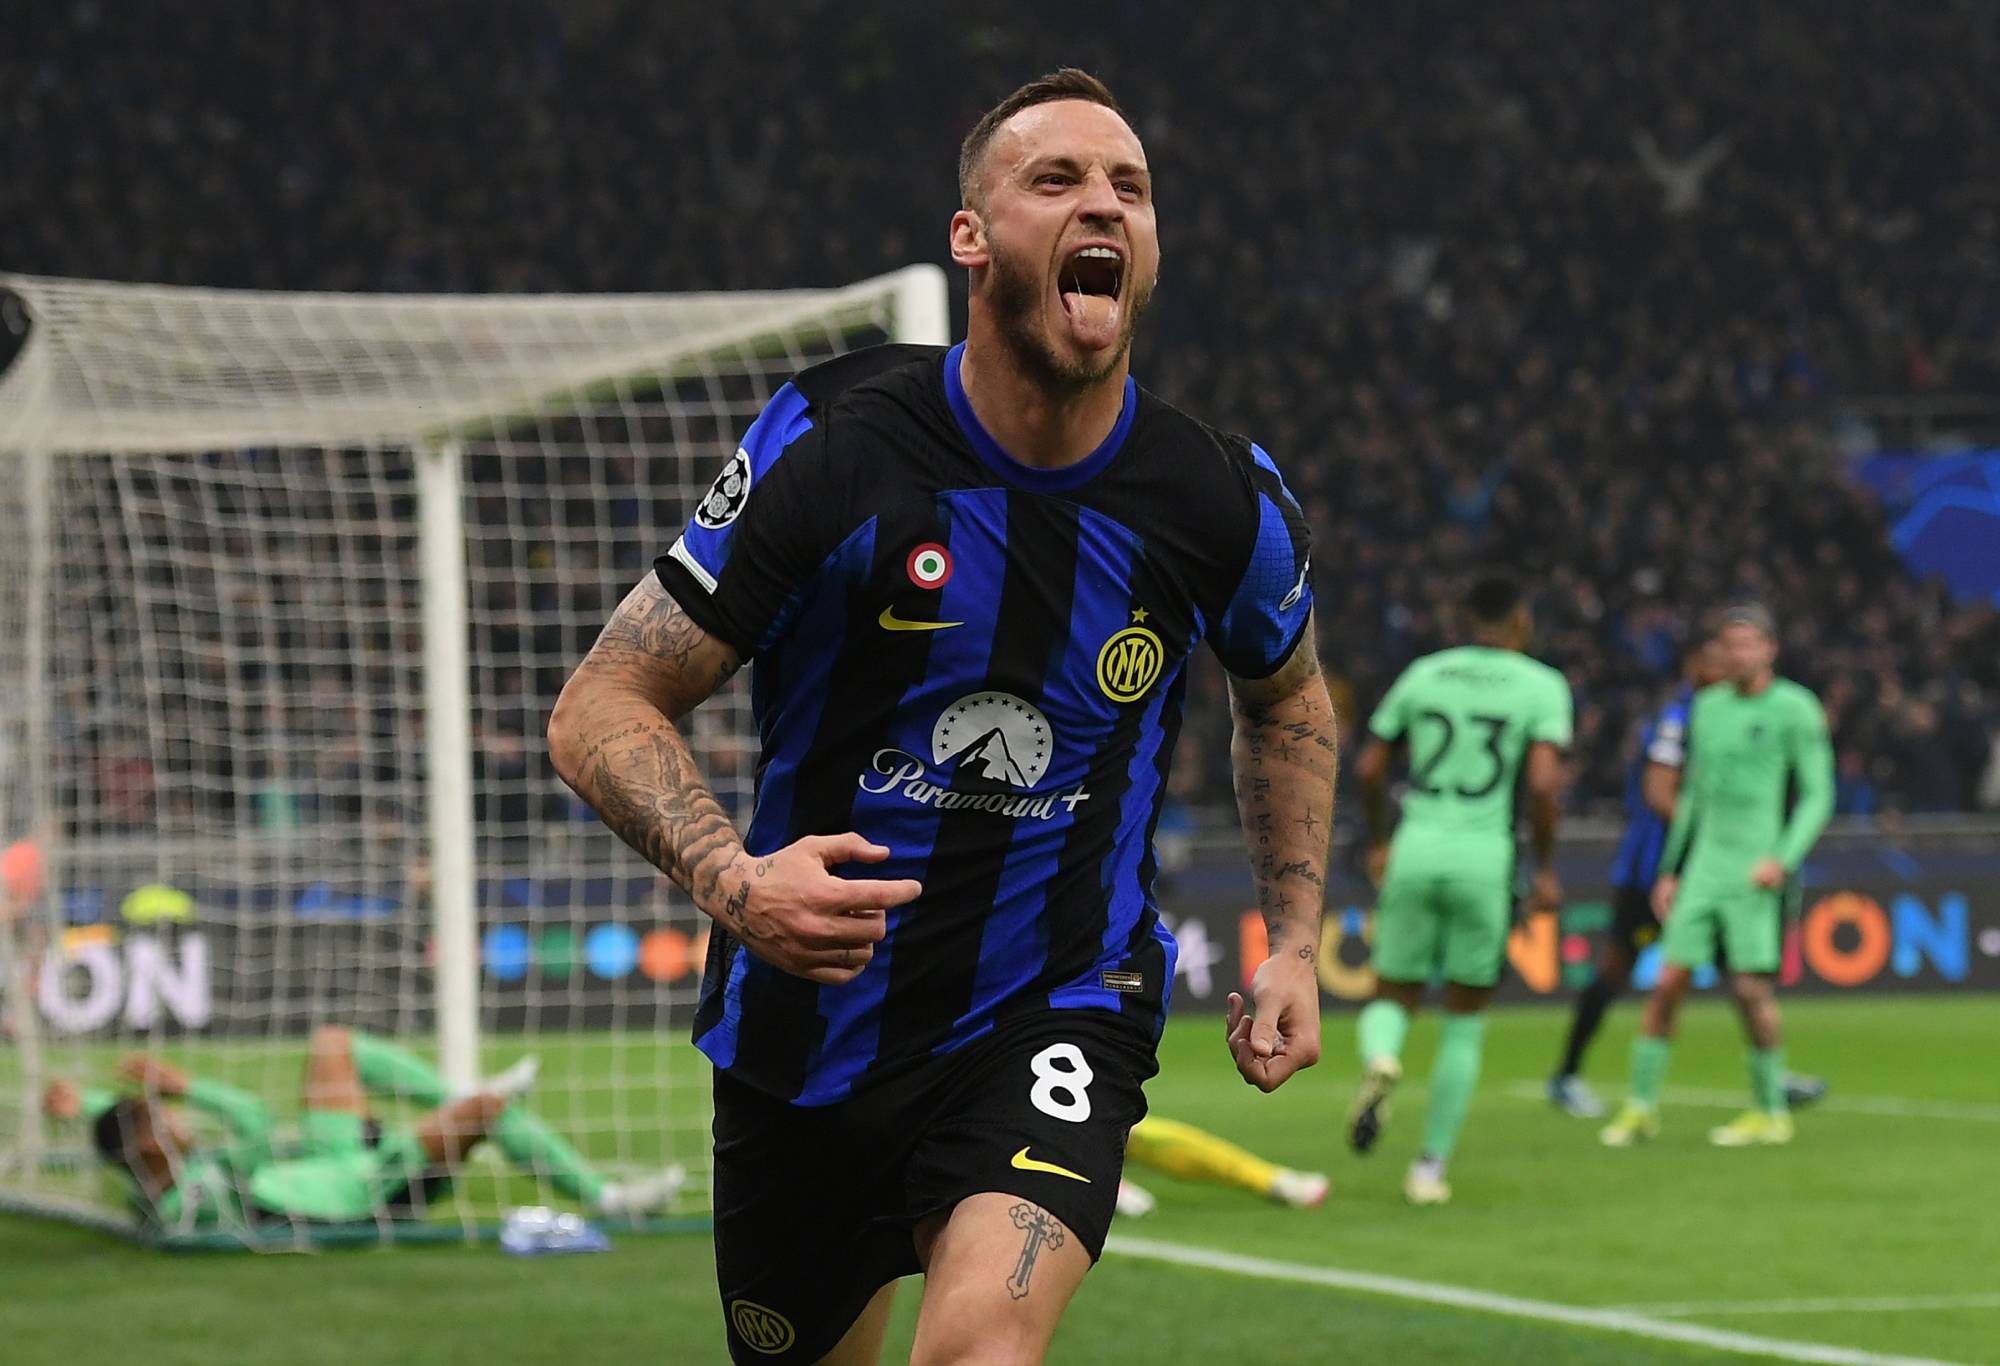 Marko Arnautovic of FC Internazionale celebrates after scoring the opening goal during the UEFA Champions League 2023/24 round of 16 first leg match between FC Internazionale and Atlético Madrid at Stadio Giuseppe Meazza on February 20, 2024 in Milan, Italy. (Photo by Alessandro Sabattini/Getty Images)